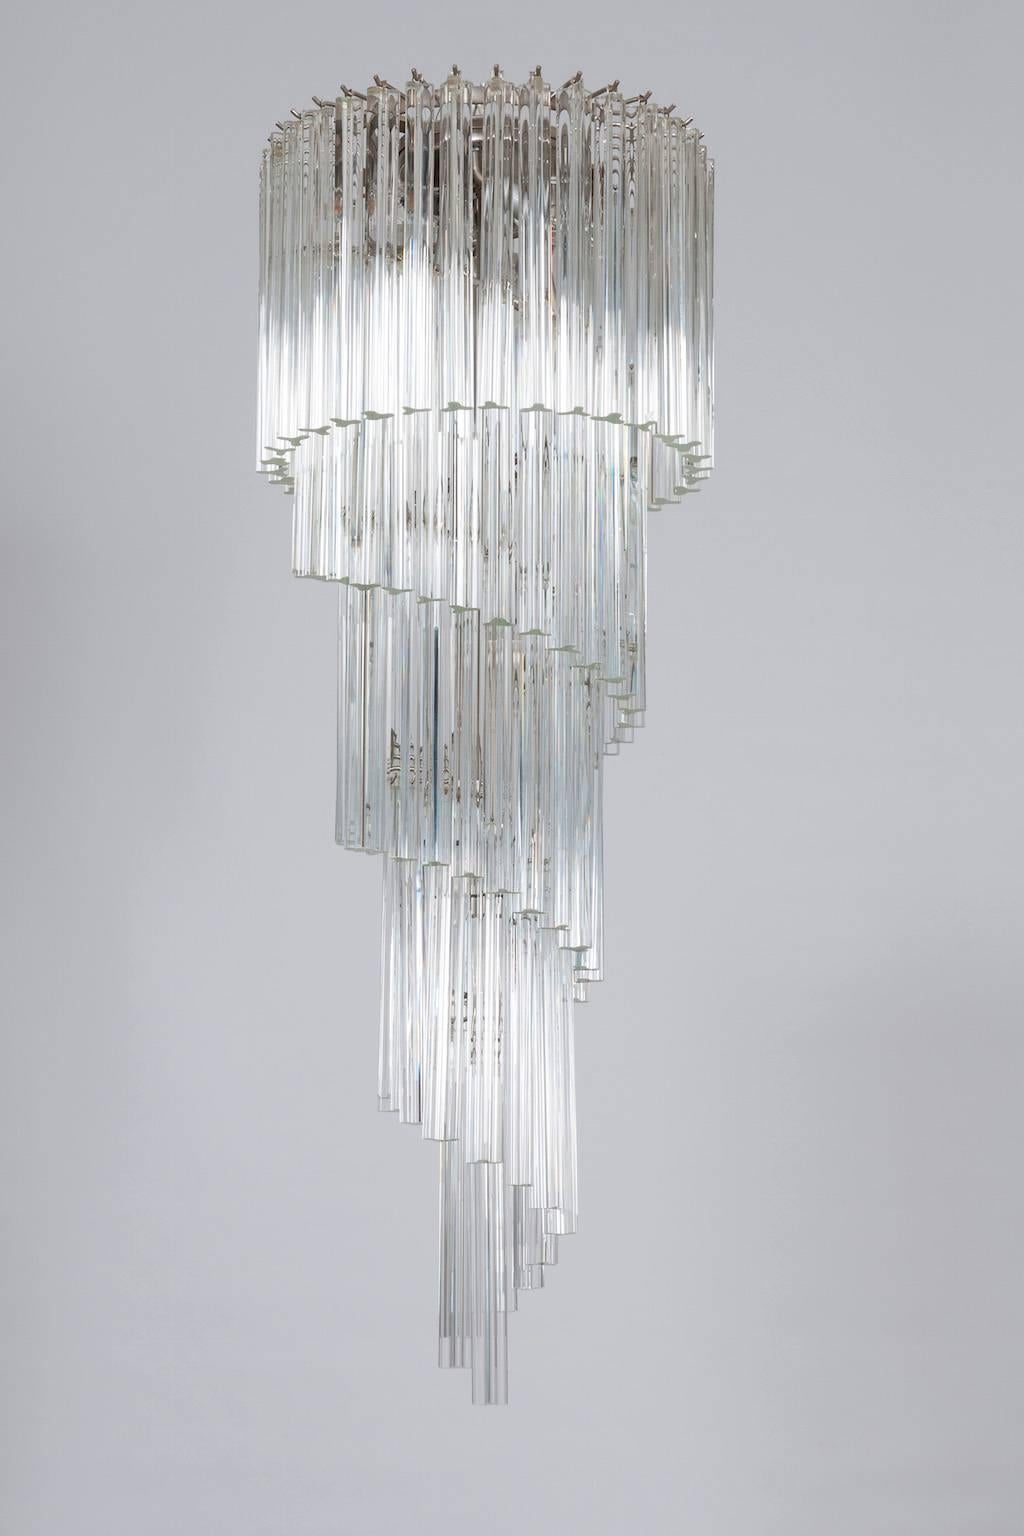 Hand-Crafted Italian Spiral Chandelier Attributed to Camer Glass, circa 1970s